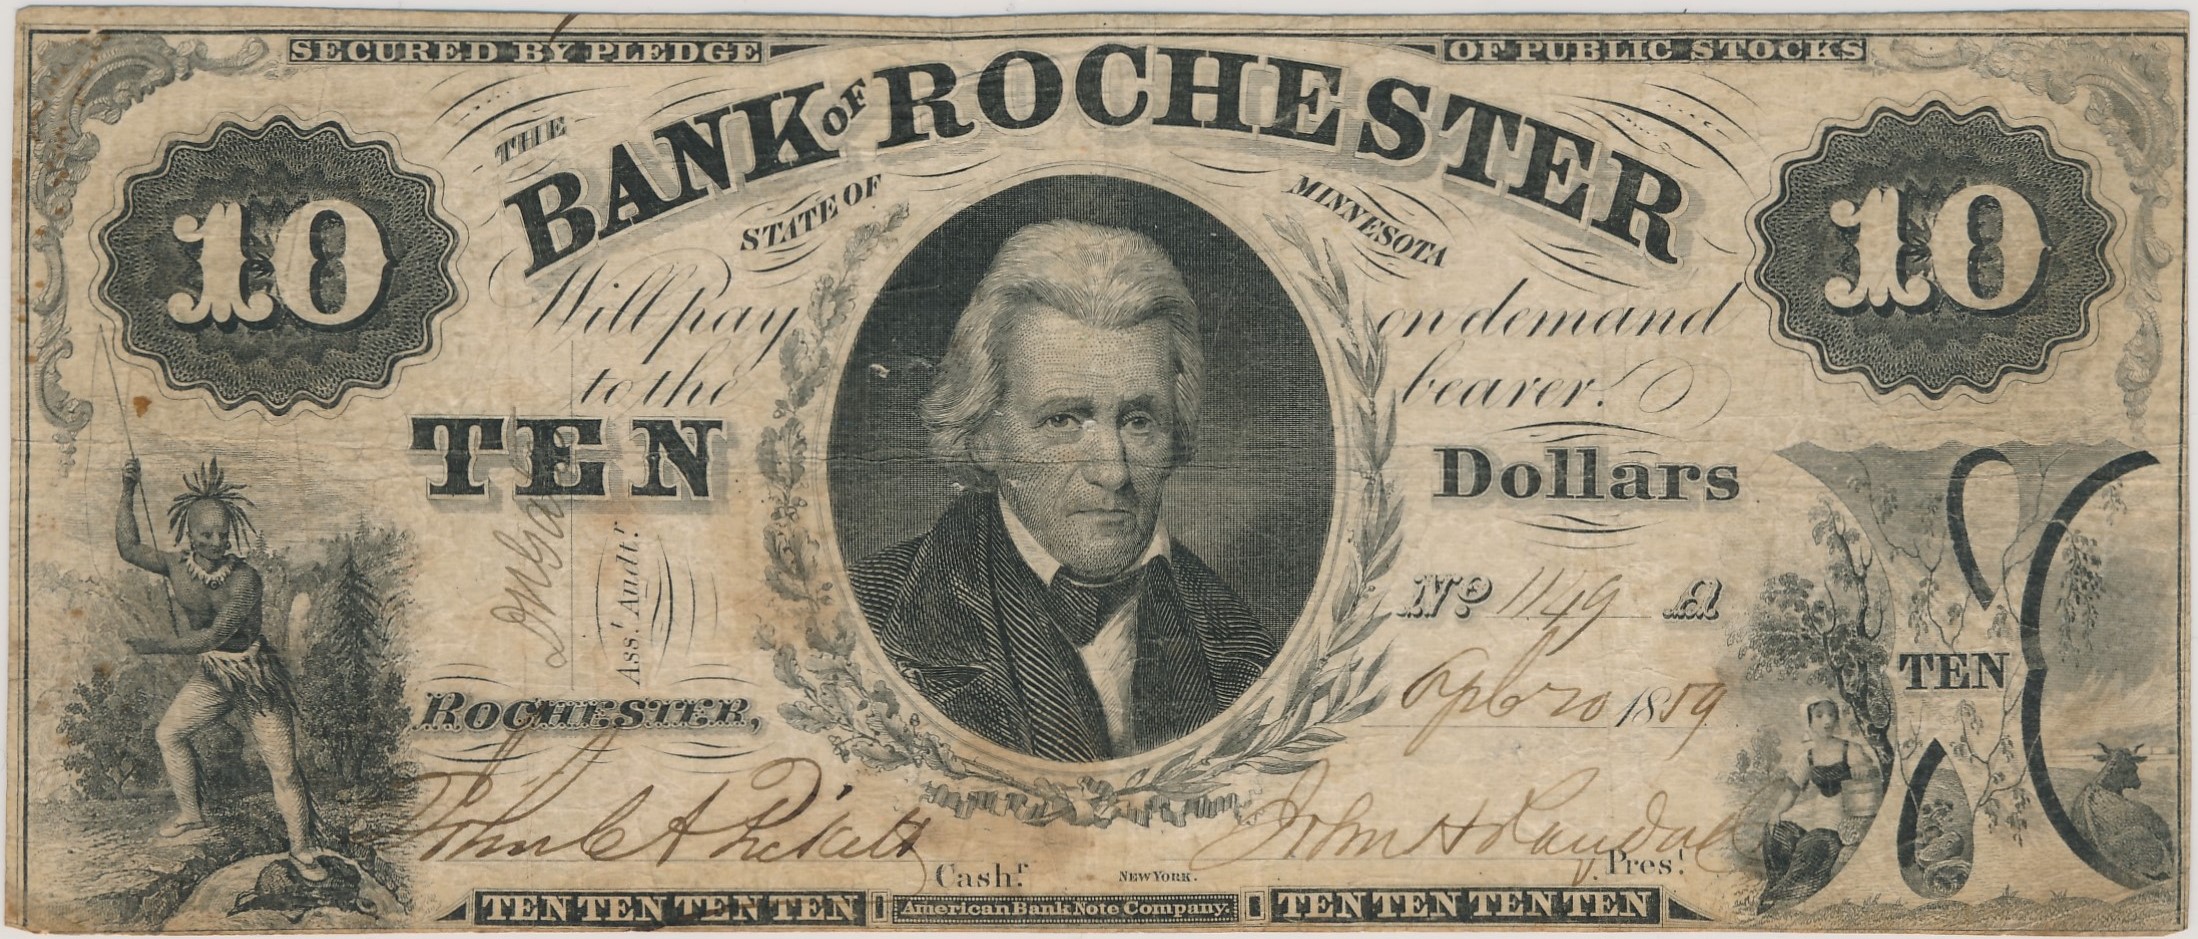 Bank of Rochester